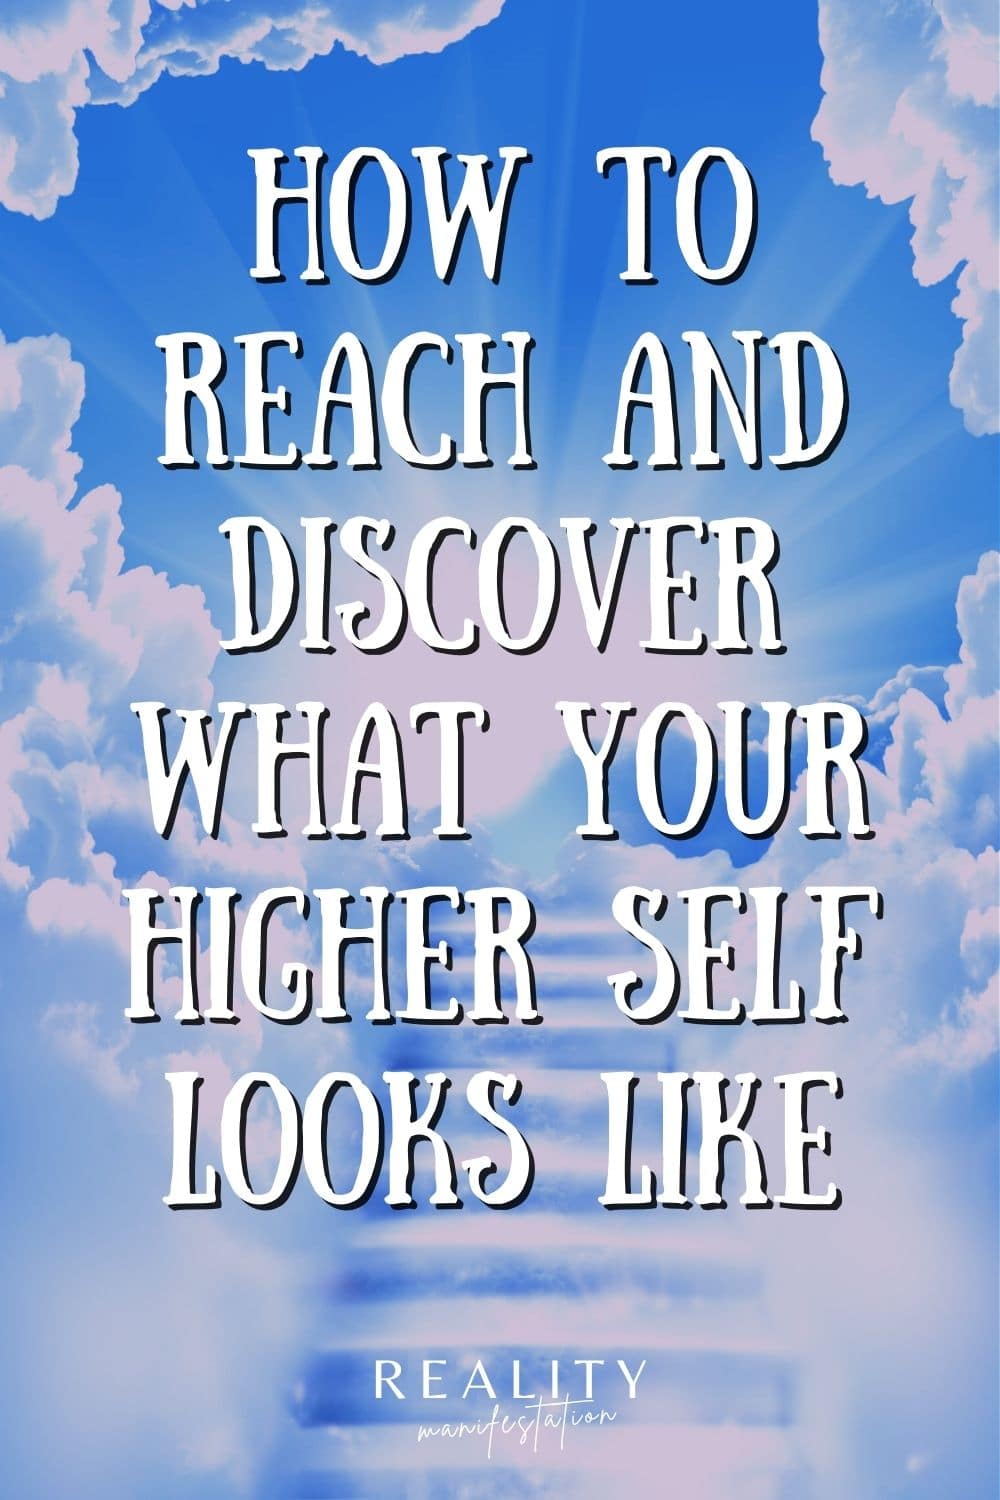 Image of clouds and the stairs with text above saying How To Reach And Discover What Your Higher Self Looks Like